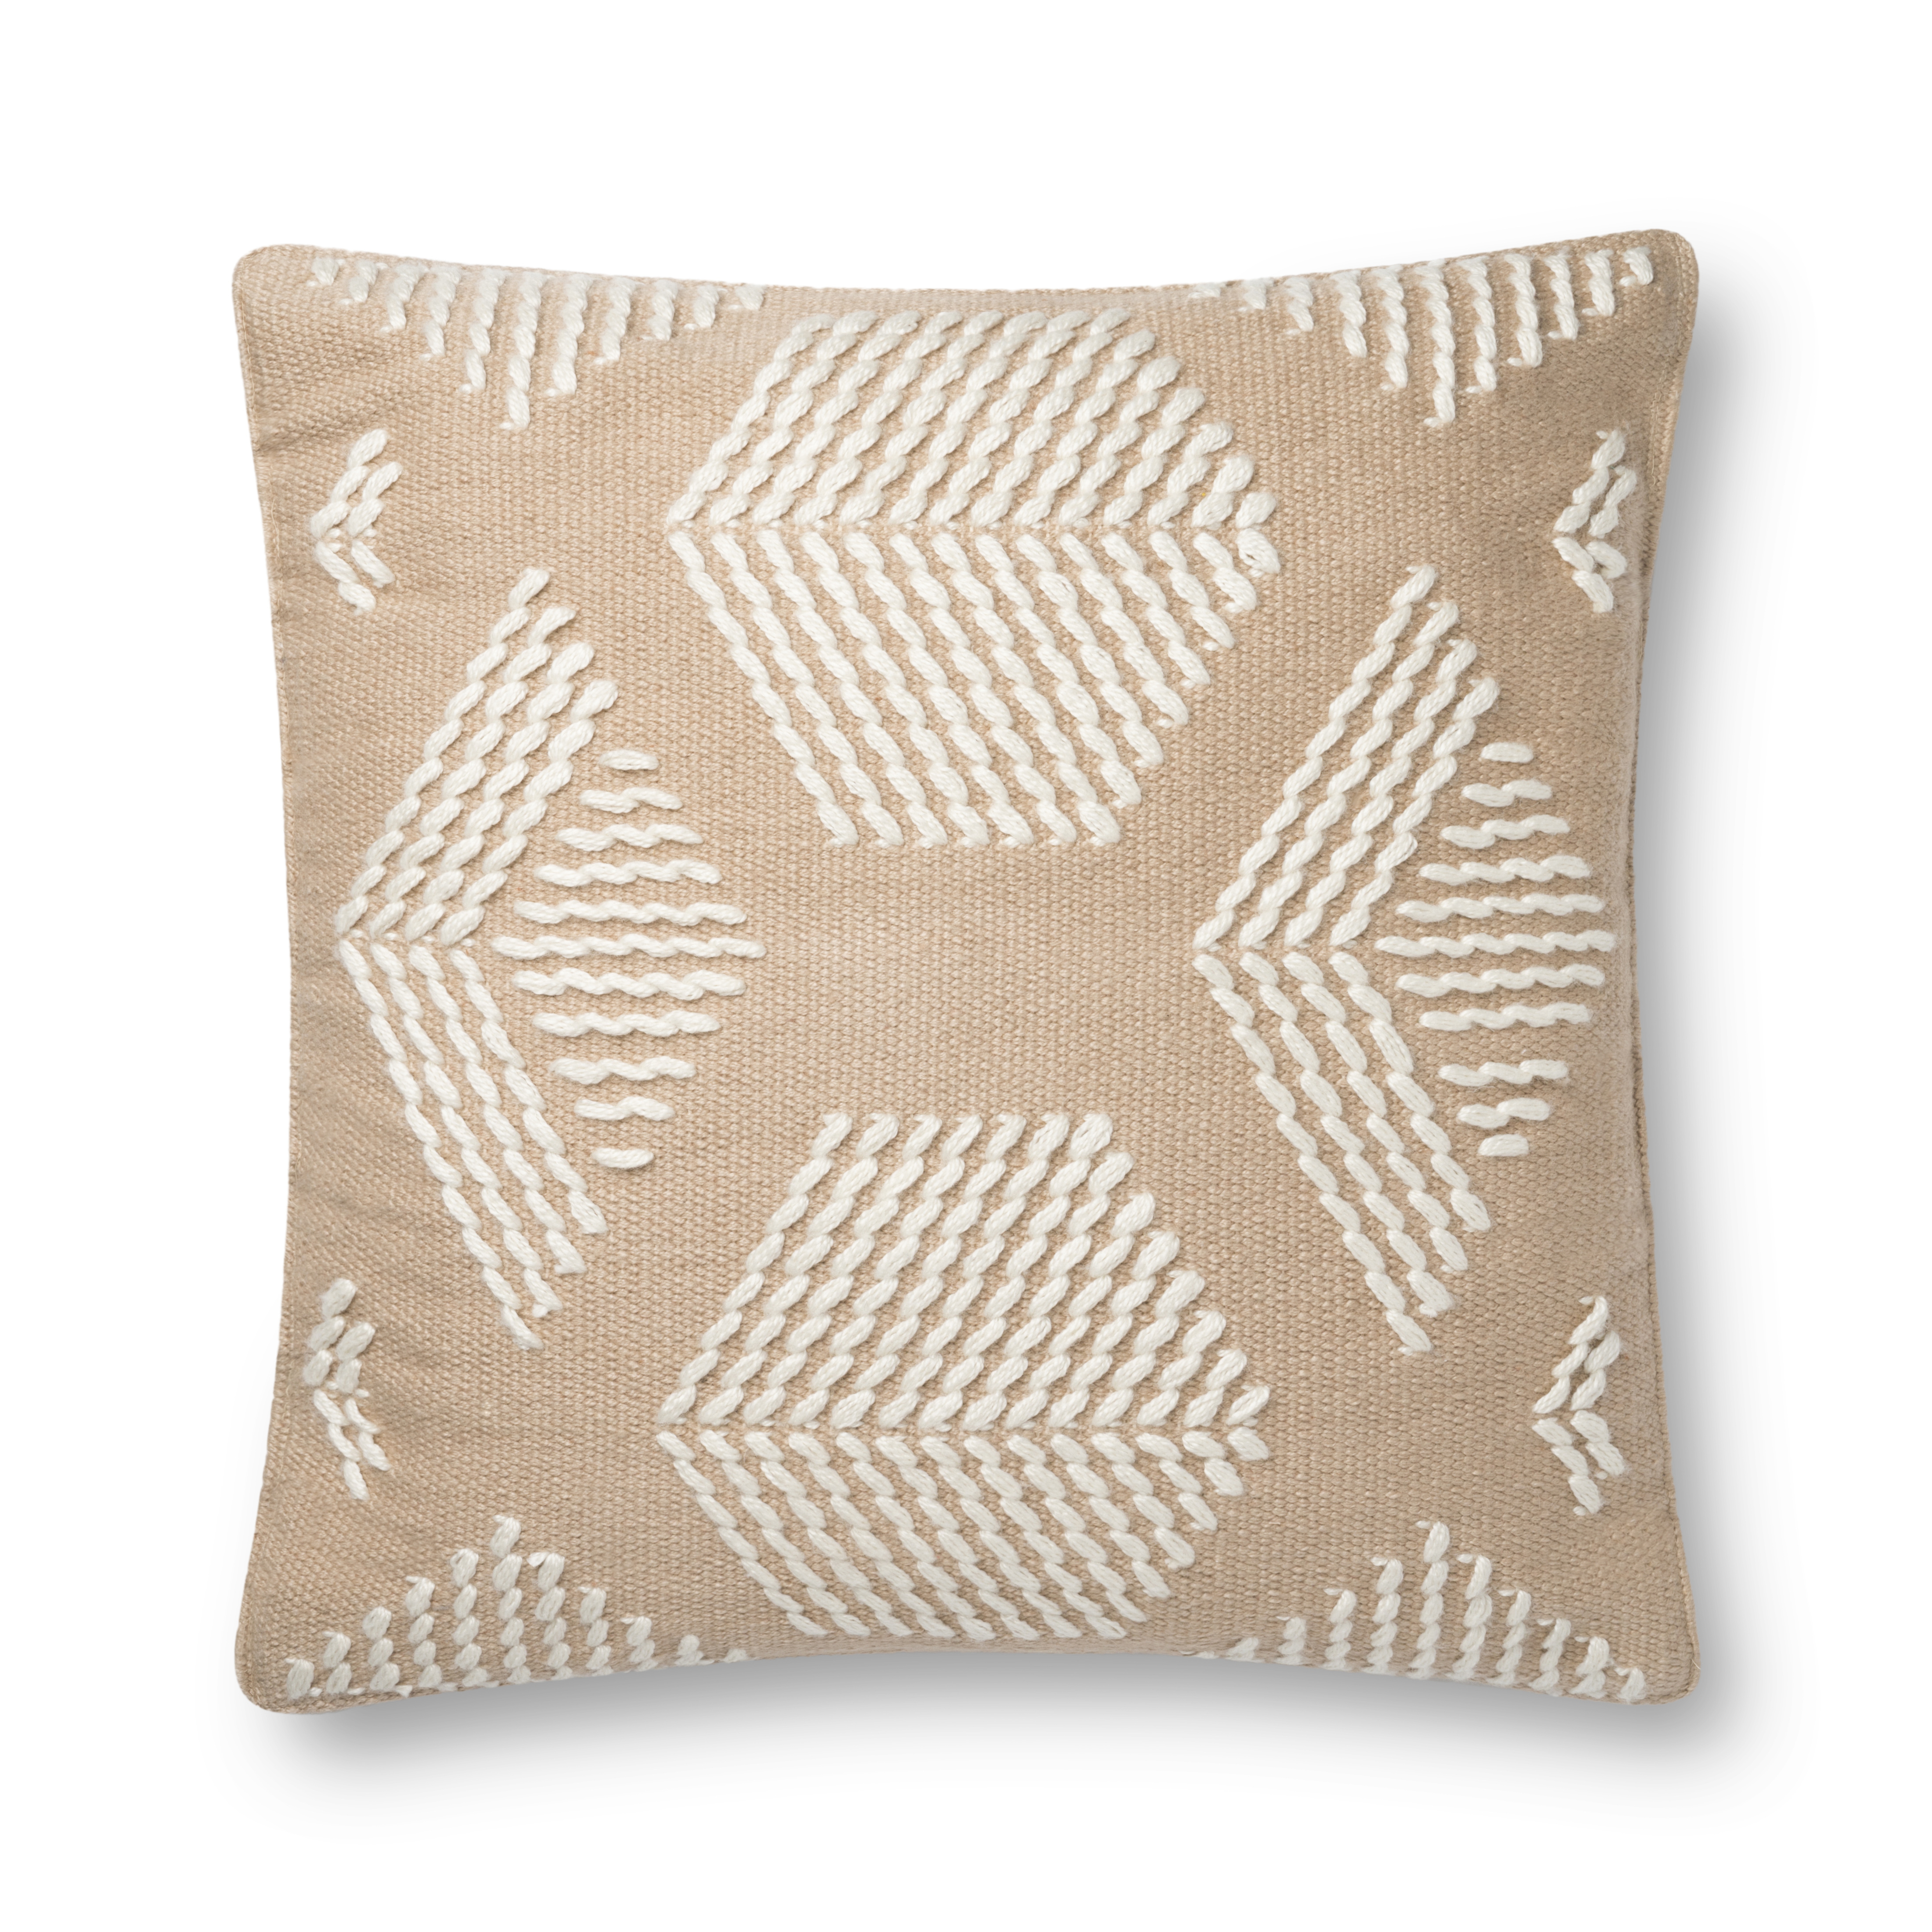 Magnolia Home by Joanna Gaines x Loloi Pillows P1120 Sand / Ivory 22" x 22" Cover Only - Loloi Rugs